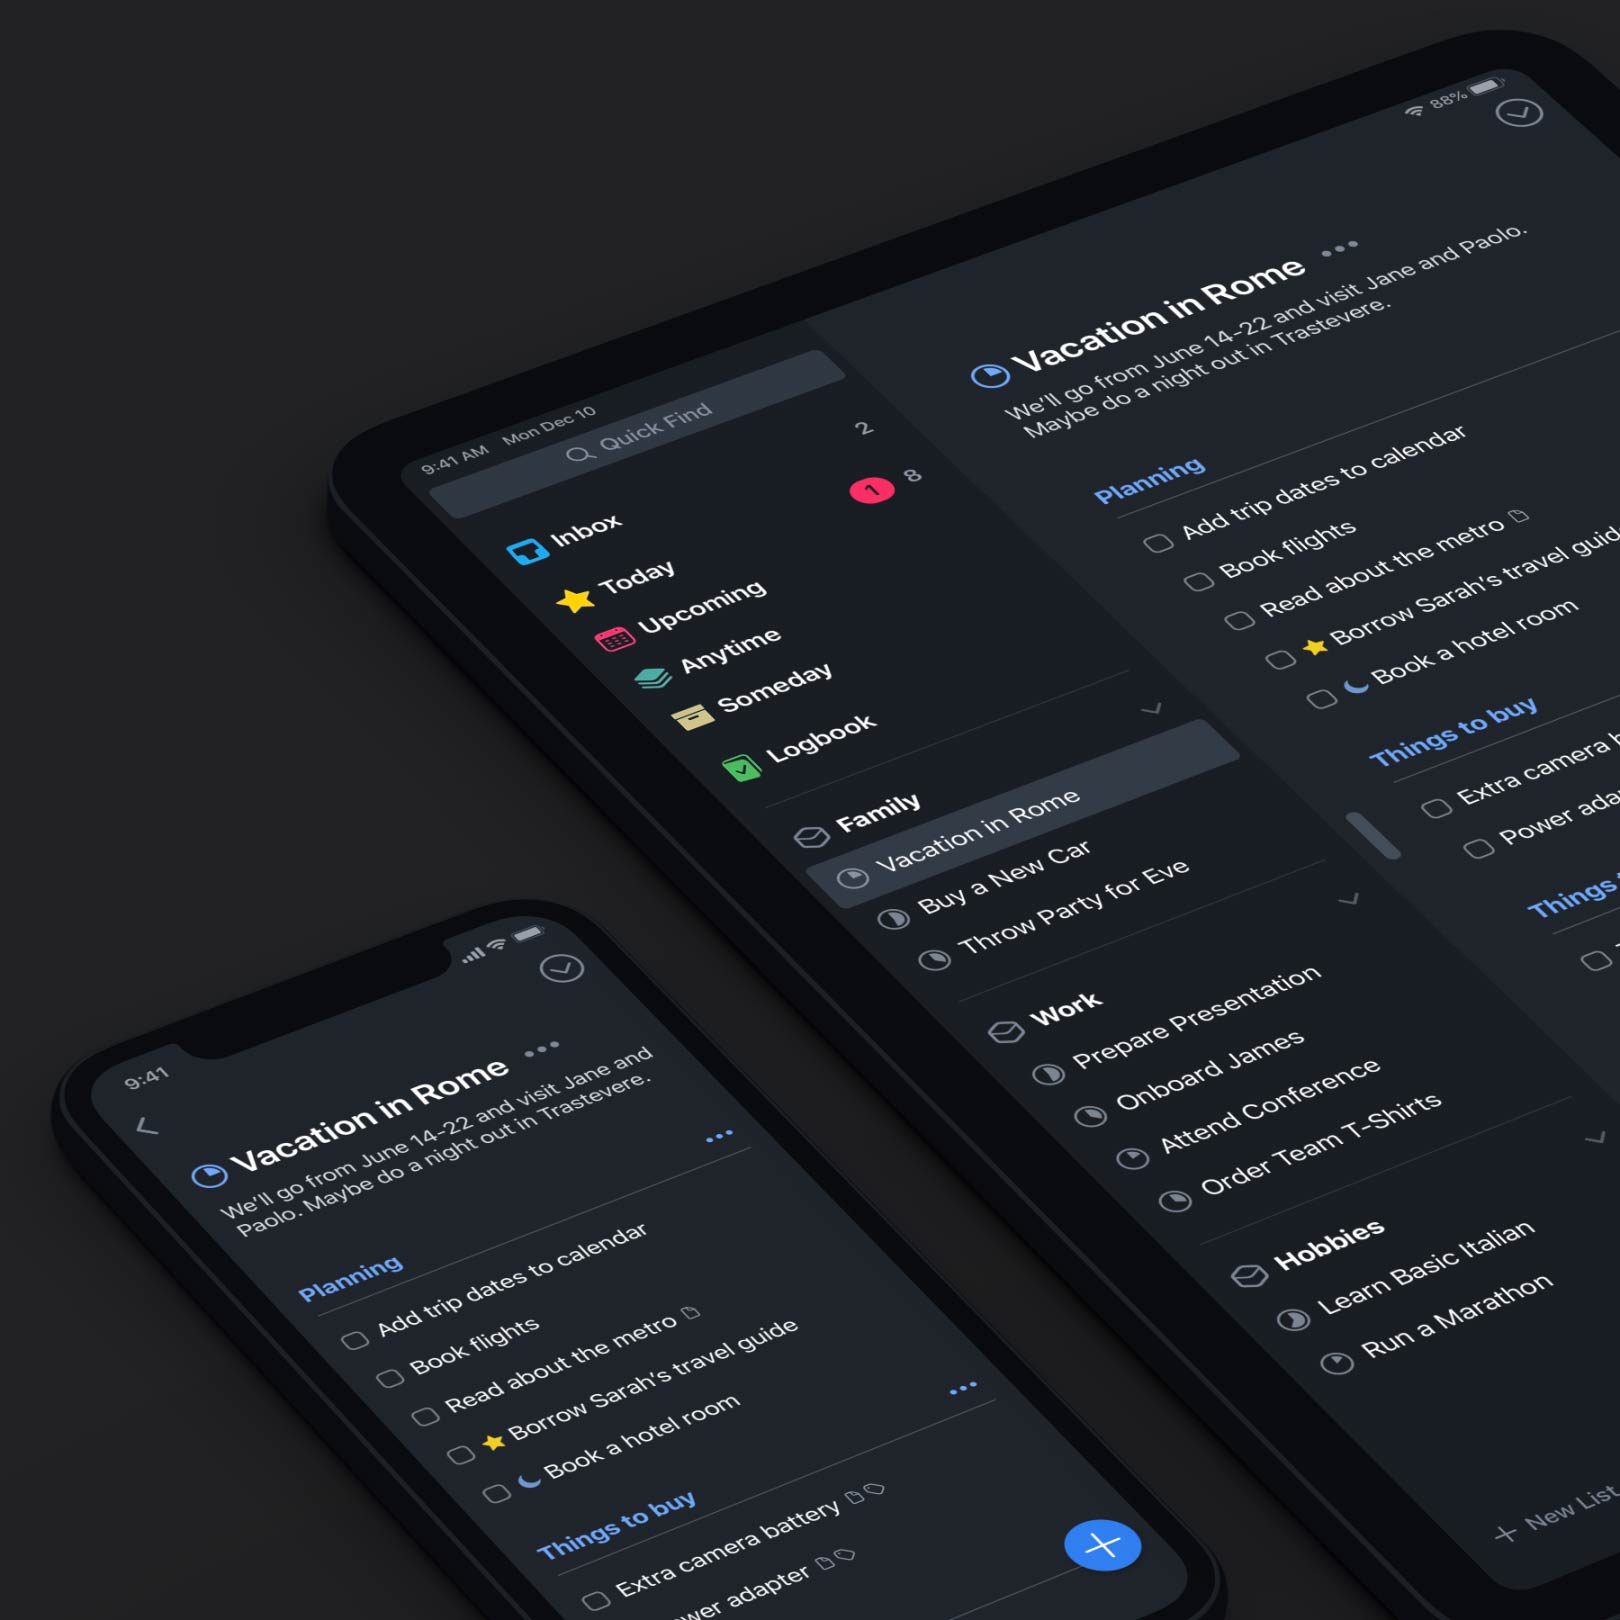 Things for iOS: Dark Appearance